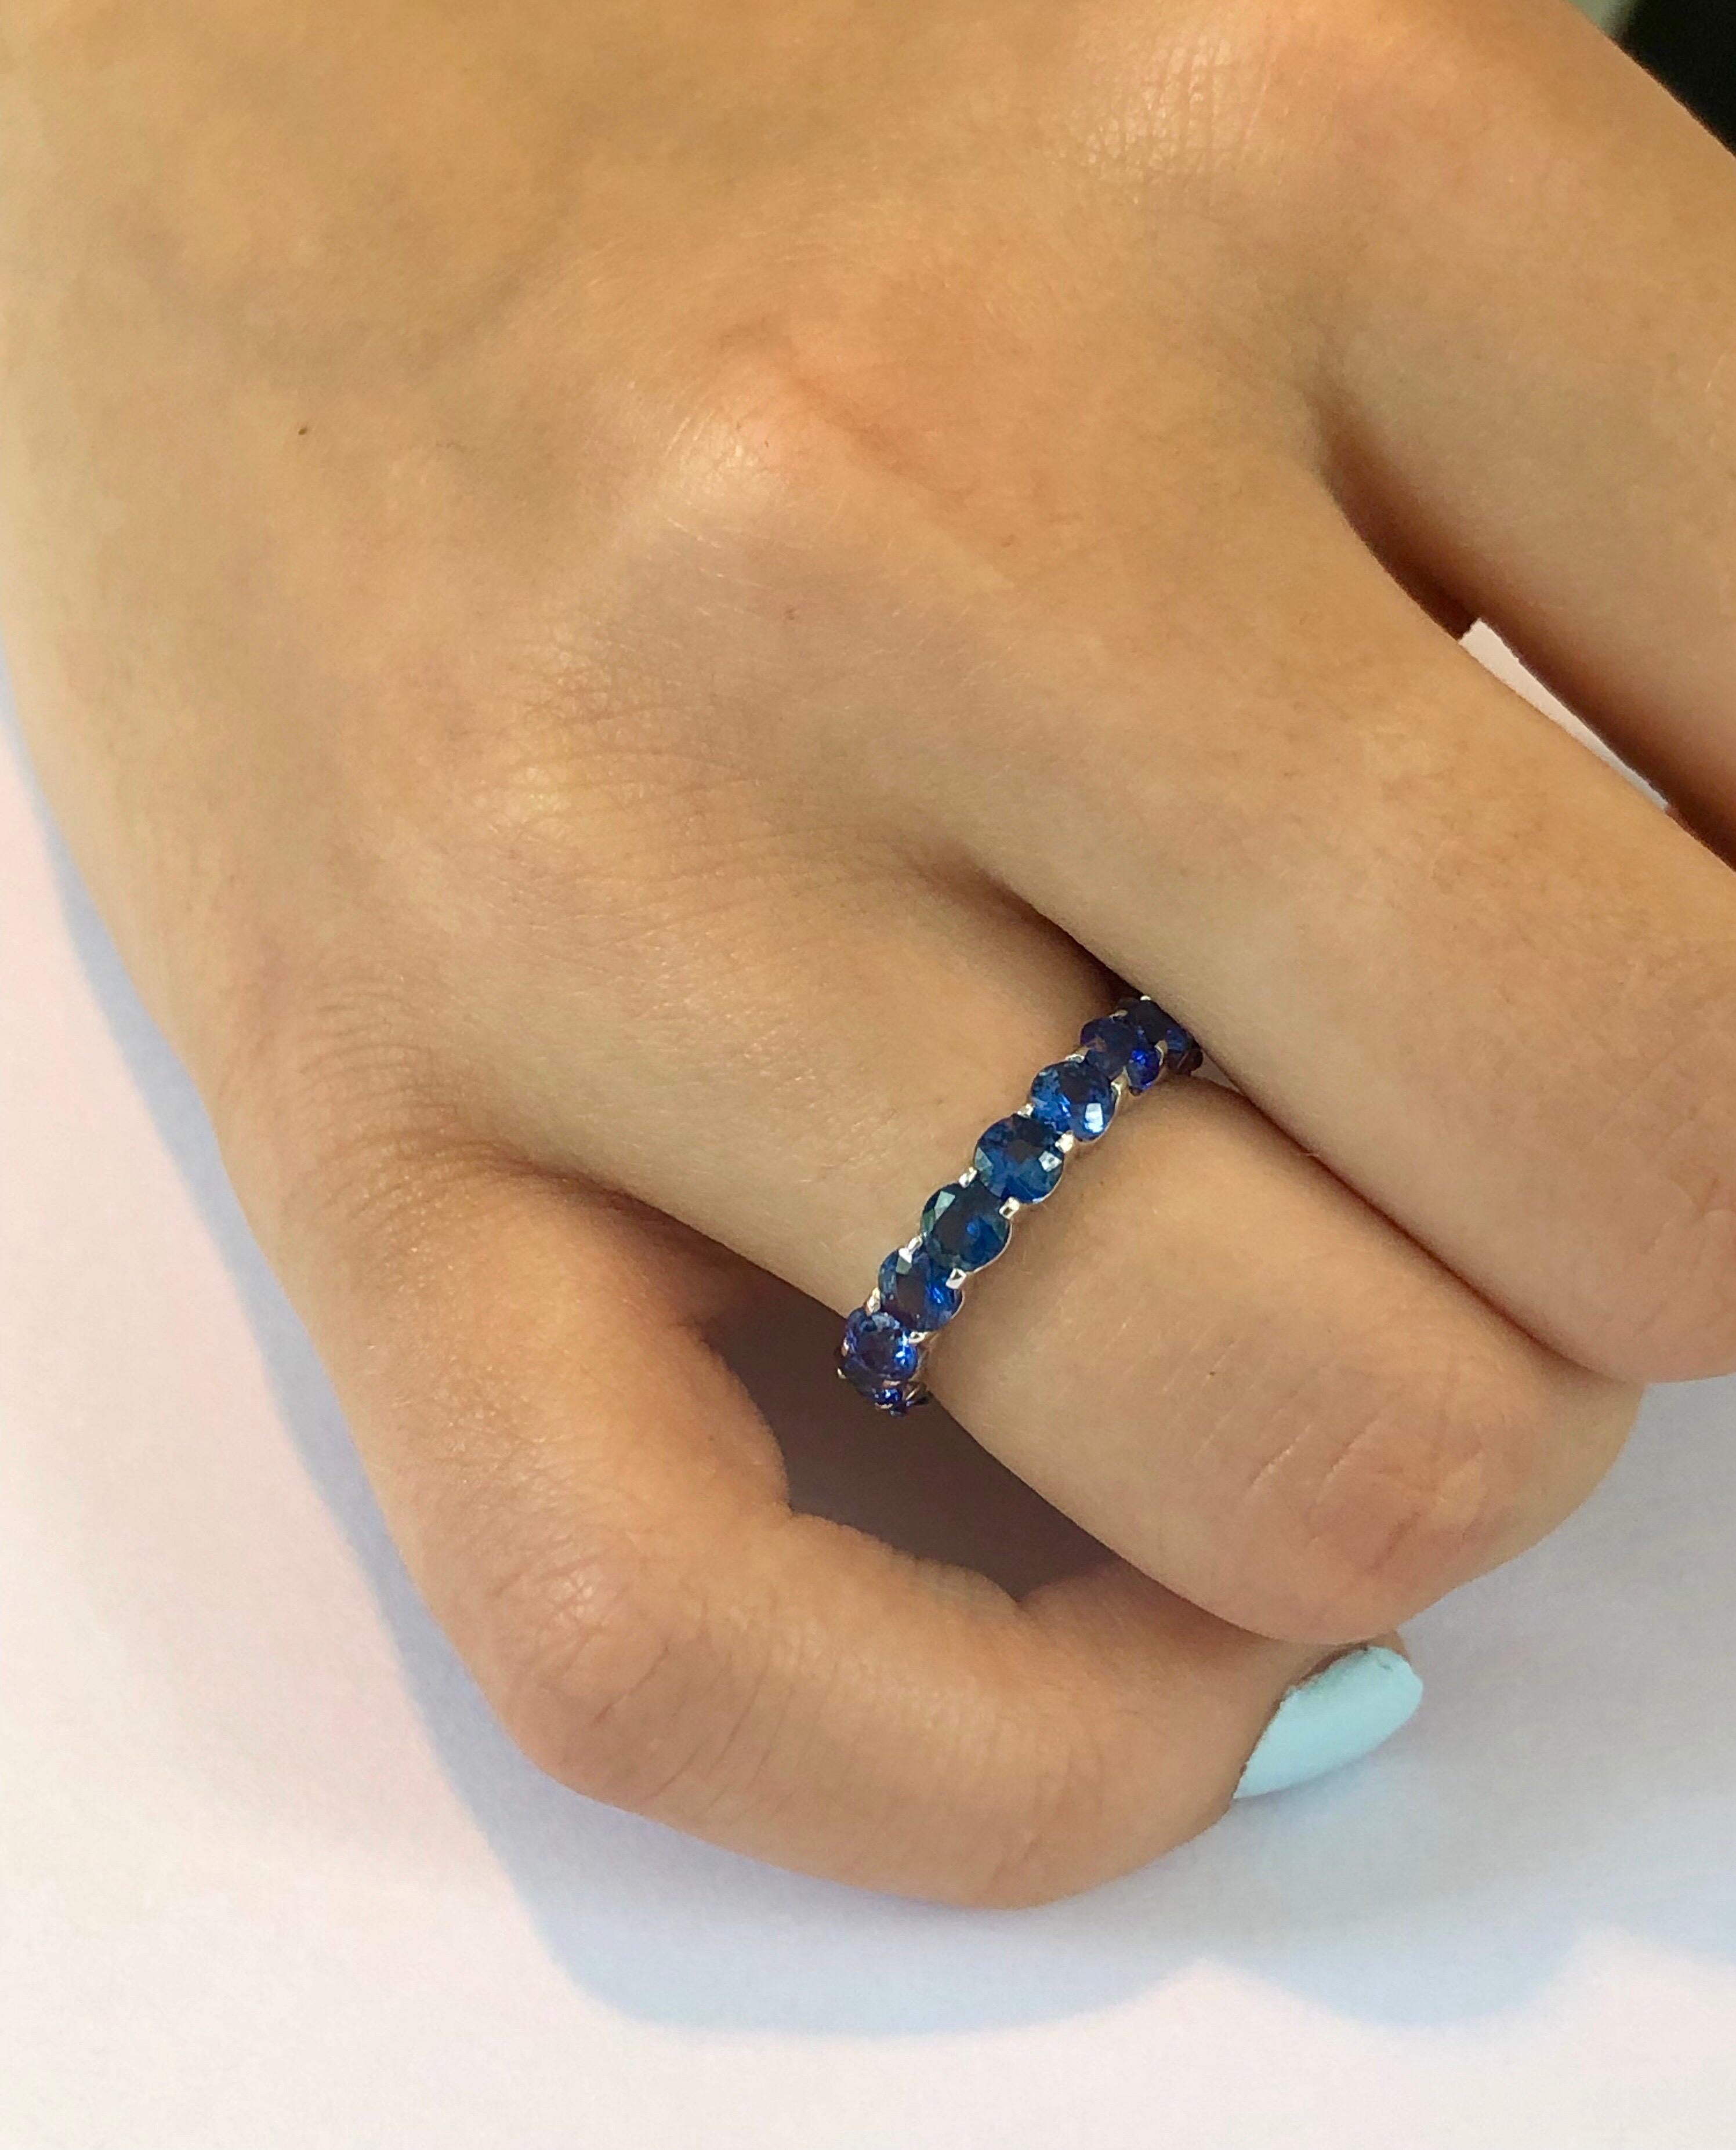 Platinum eternity ring with round cut sapphire prong-set. 
Sapphires weighing 4.50 carat 
Sapphire stone size 3.5 millimeter 
Made to order in special size
Two weeks delivery 
Fine quality diamond cut round sapphires 
New Ring
Available all finger